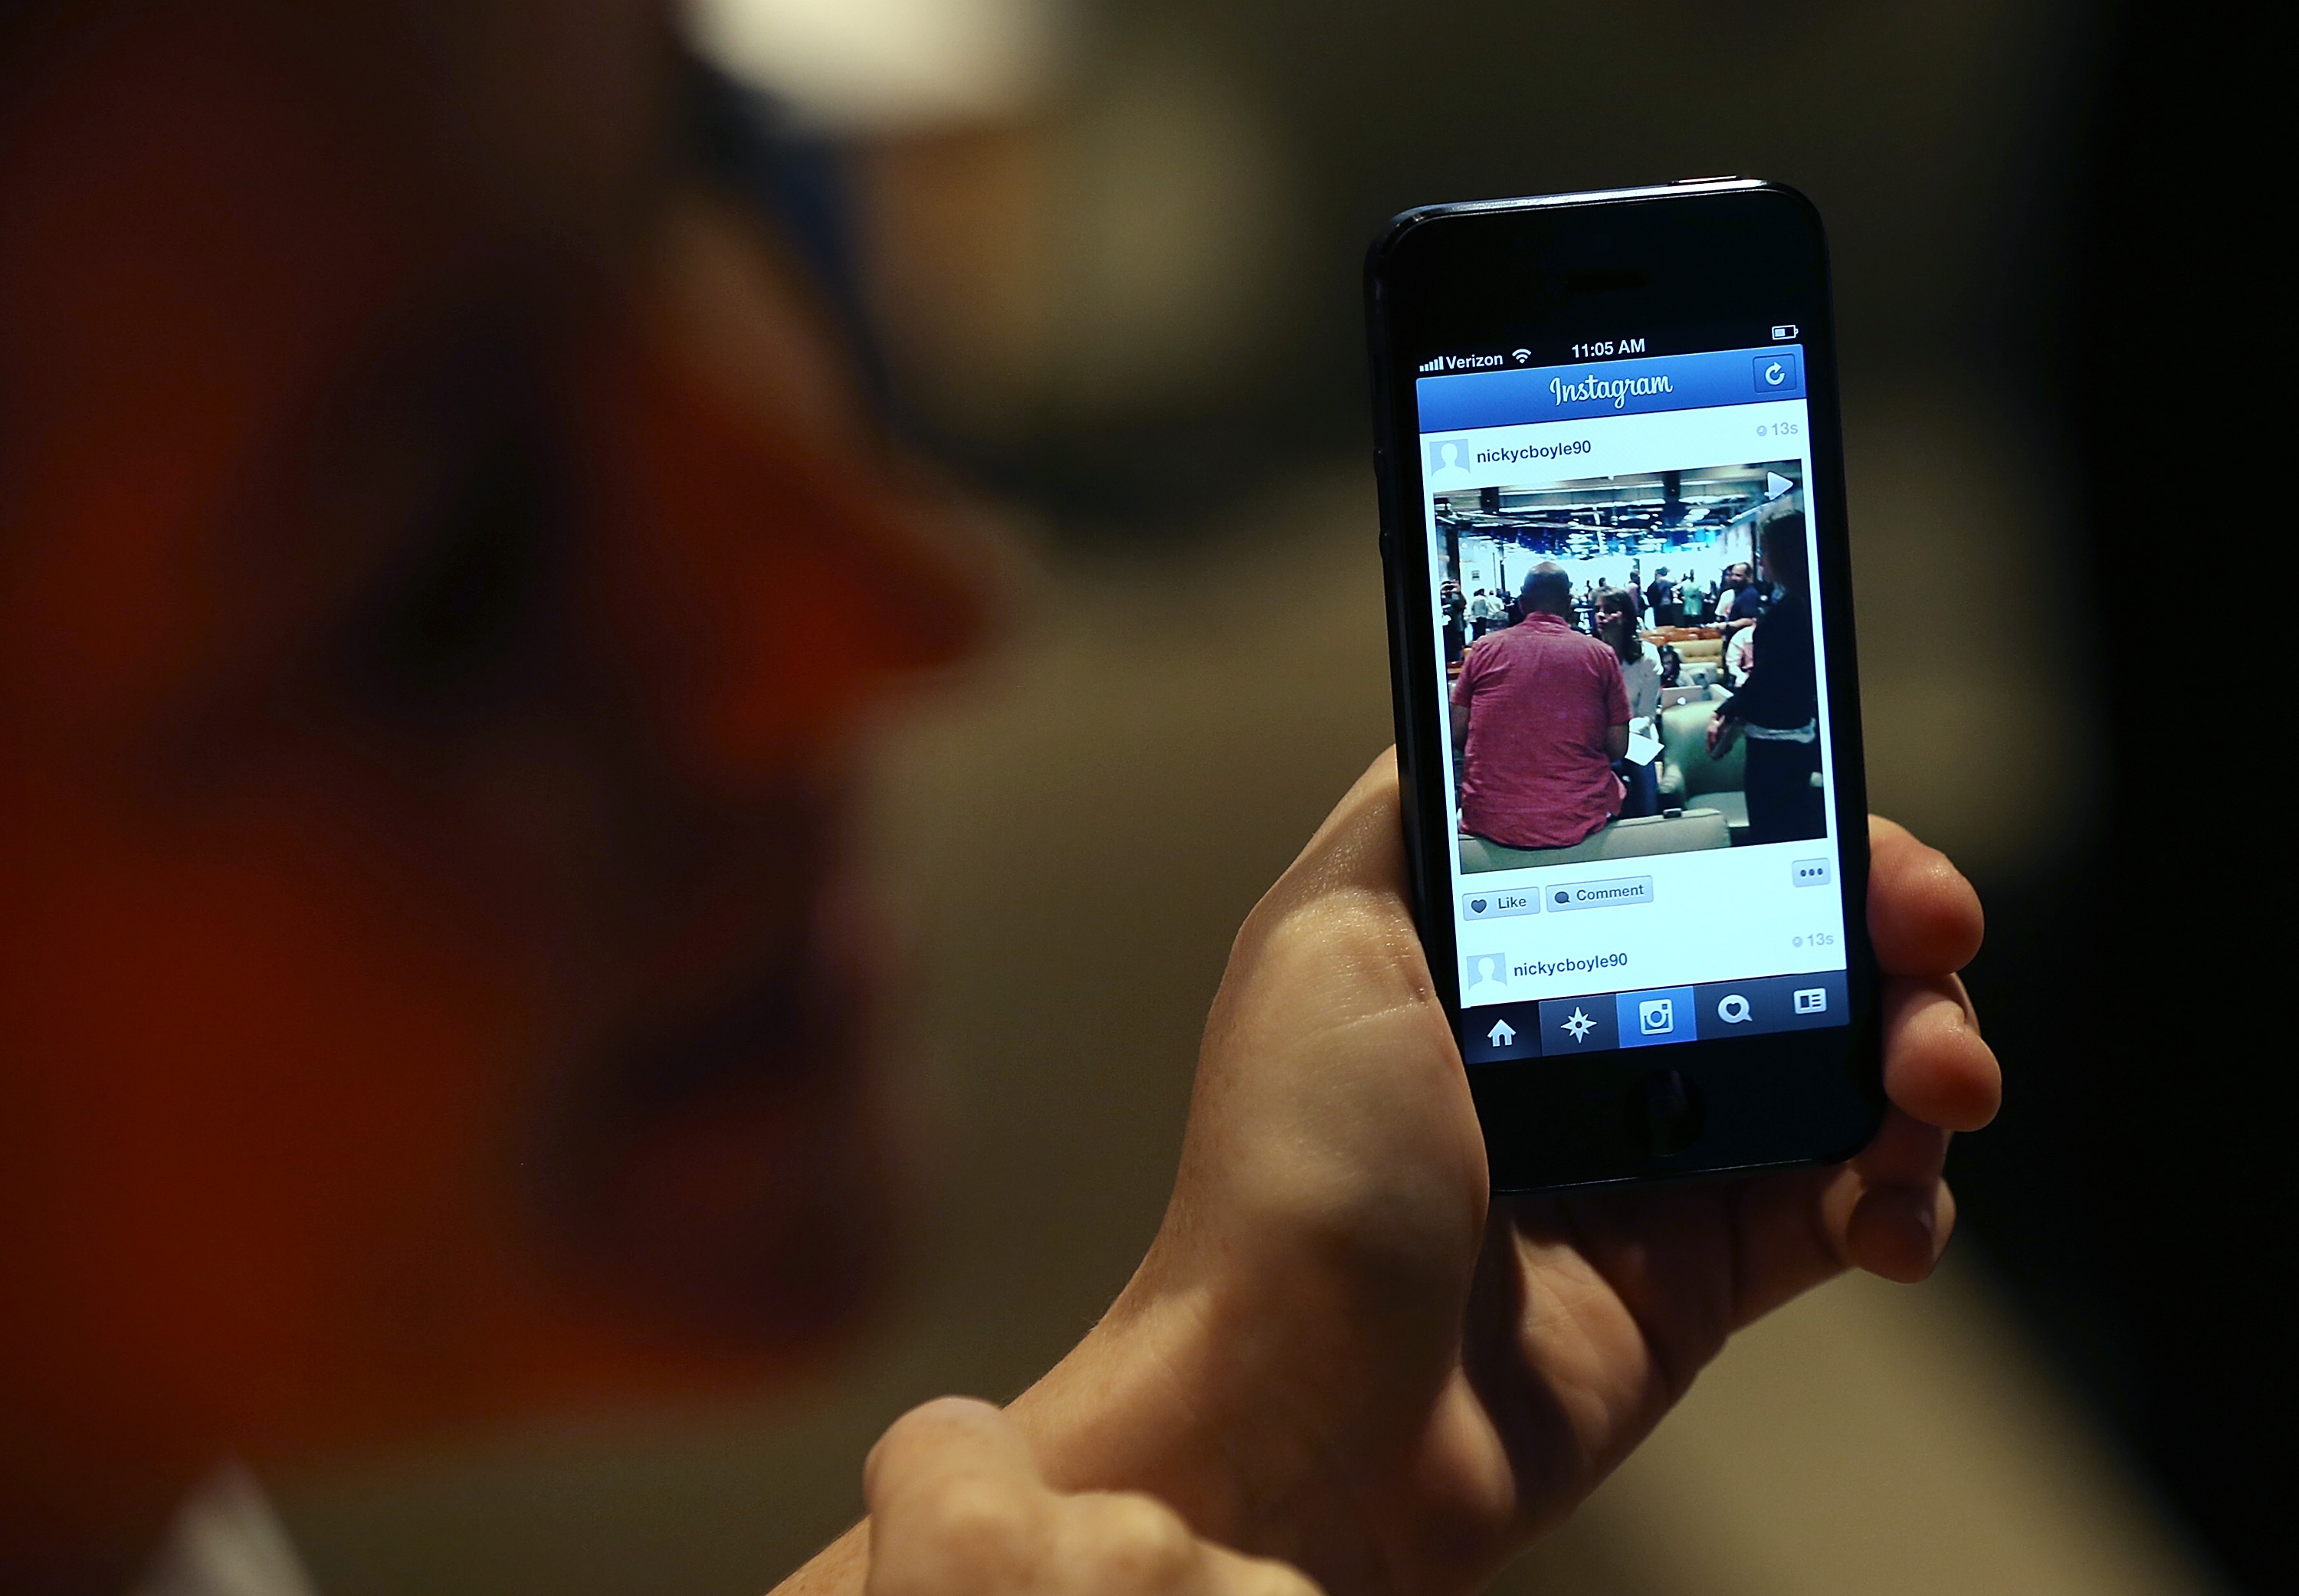 A Facebook employee demonstrates the new Instagram video option during a press event at Facebook headquarters on June 20, 2013 in Menlo Park, California. (Justin Sullivan—Getty Images)